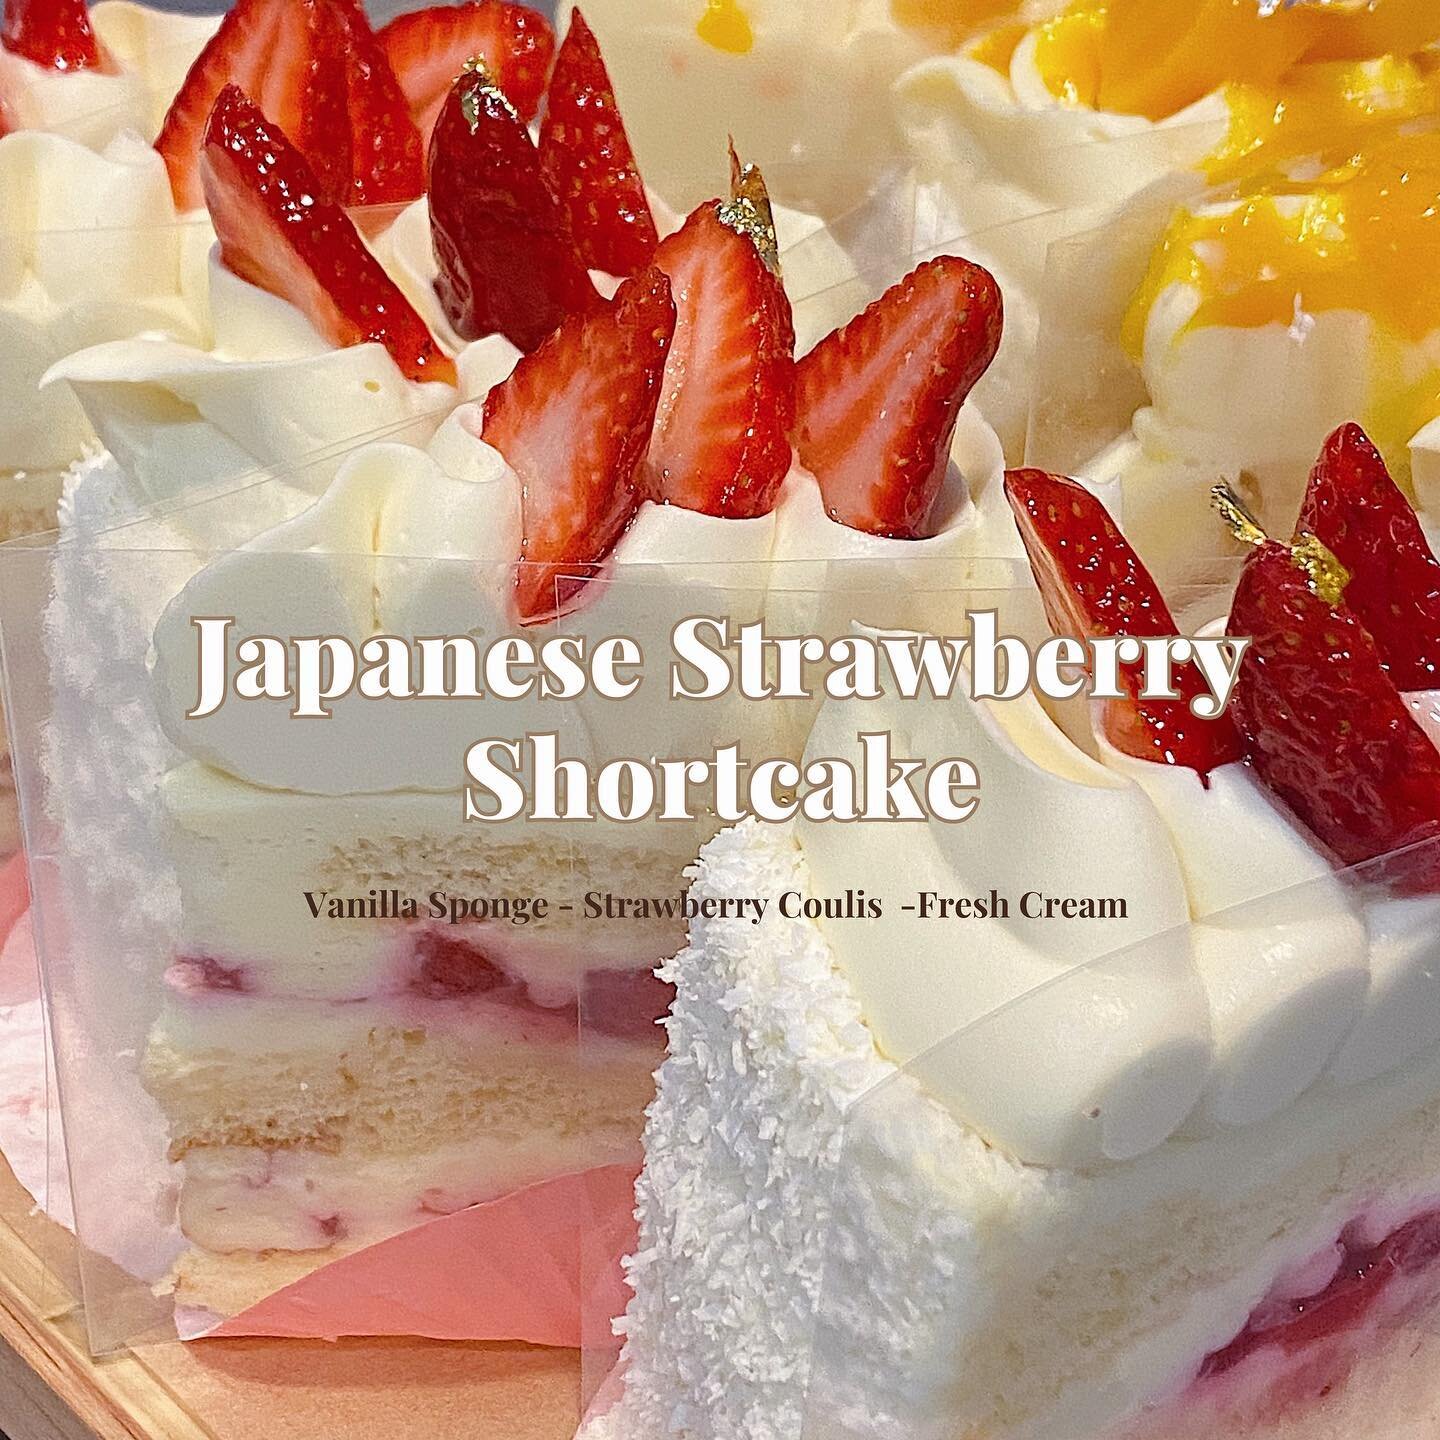 #Cake for #breakfast? Don&rsquo;t mind if we do! Swing by @alittlesomethingcake and a grab a slice of our Japanese #Strawberry #Shortcake or try something new with our Tiramisu #Basque #Cheesecake. DM us with any questions, and we&rsquo;ll make sure 